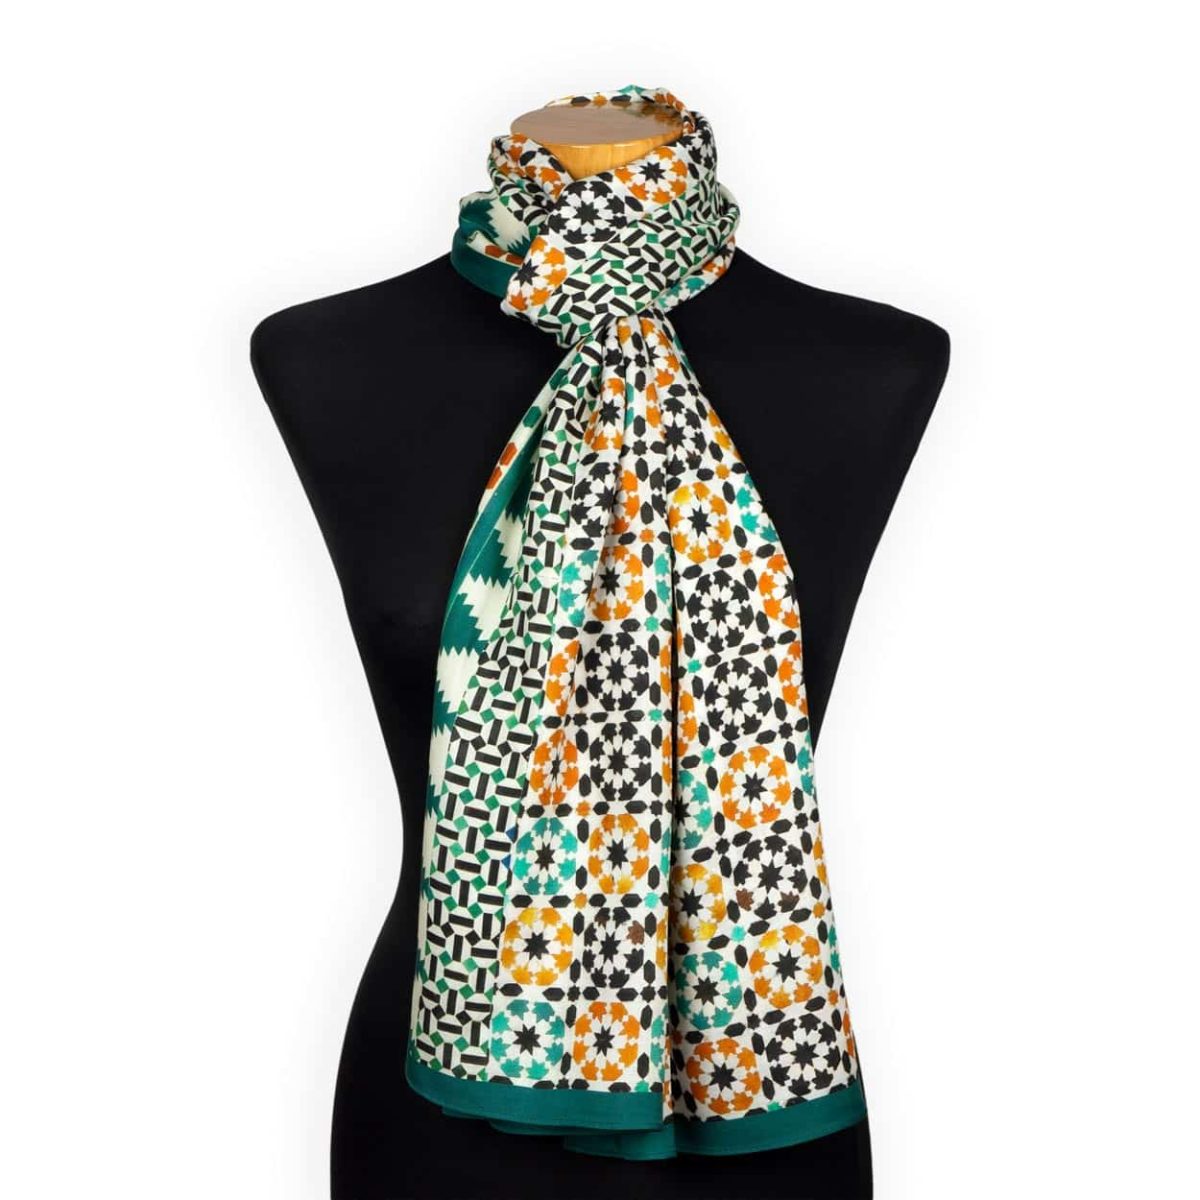 Green and orange scarf inspired by islamic tiles from the Alhambra Palace